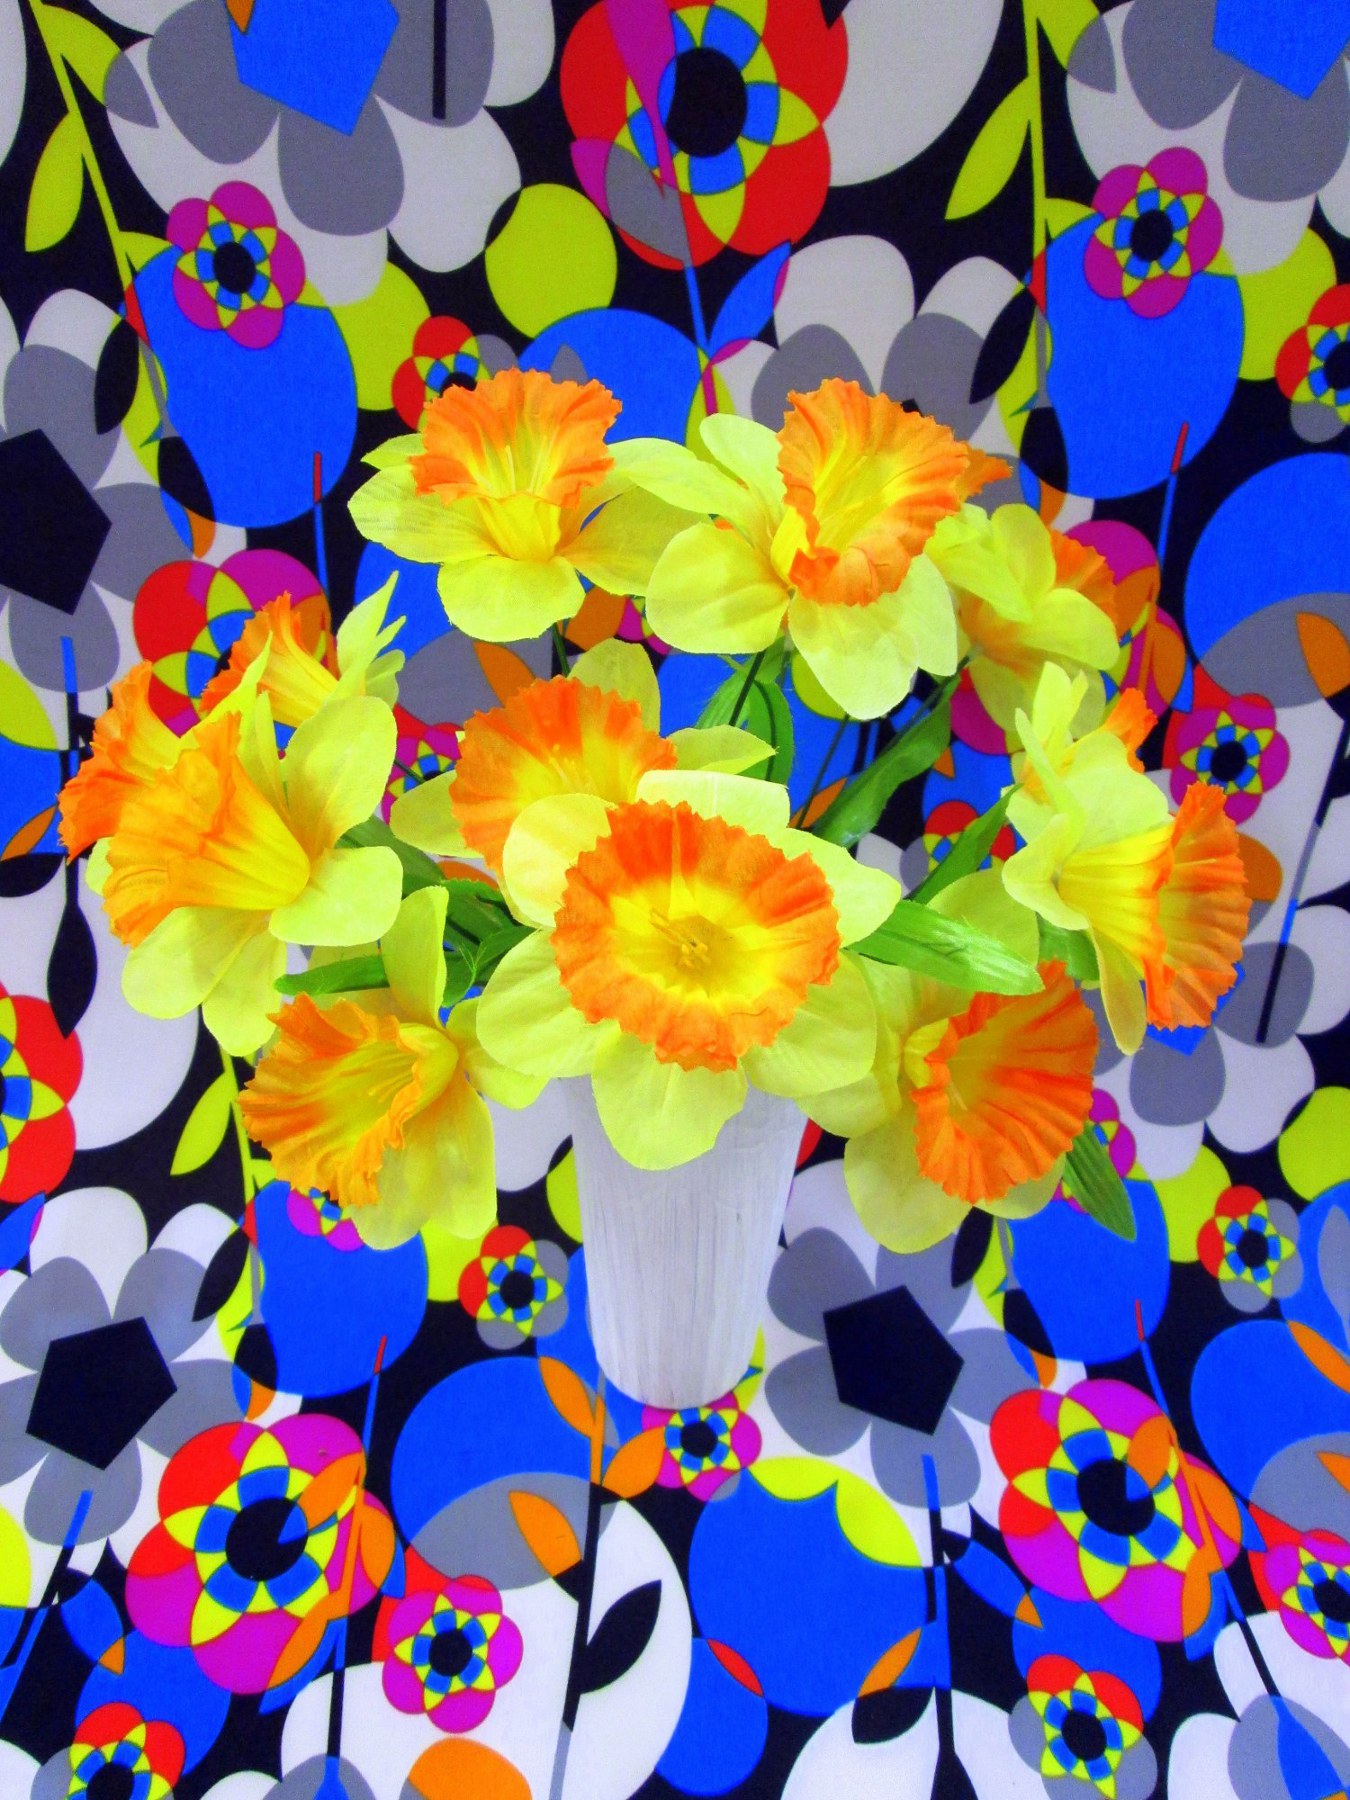 1549920717590-1Can-You-Dig-It-A-Chromatic-Series-of-Floral-Arrangements-Yellow-2014